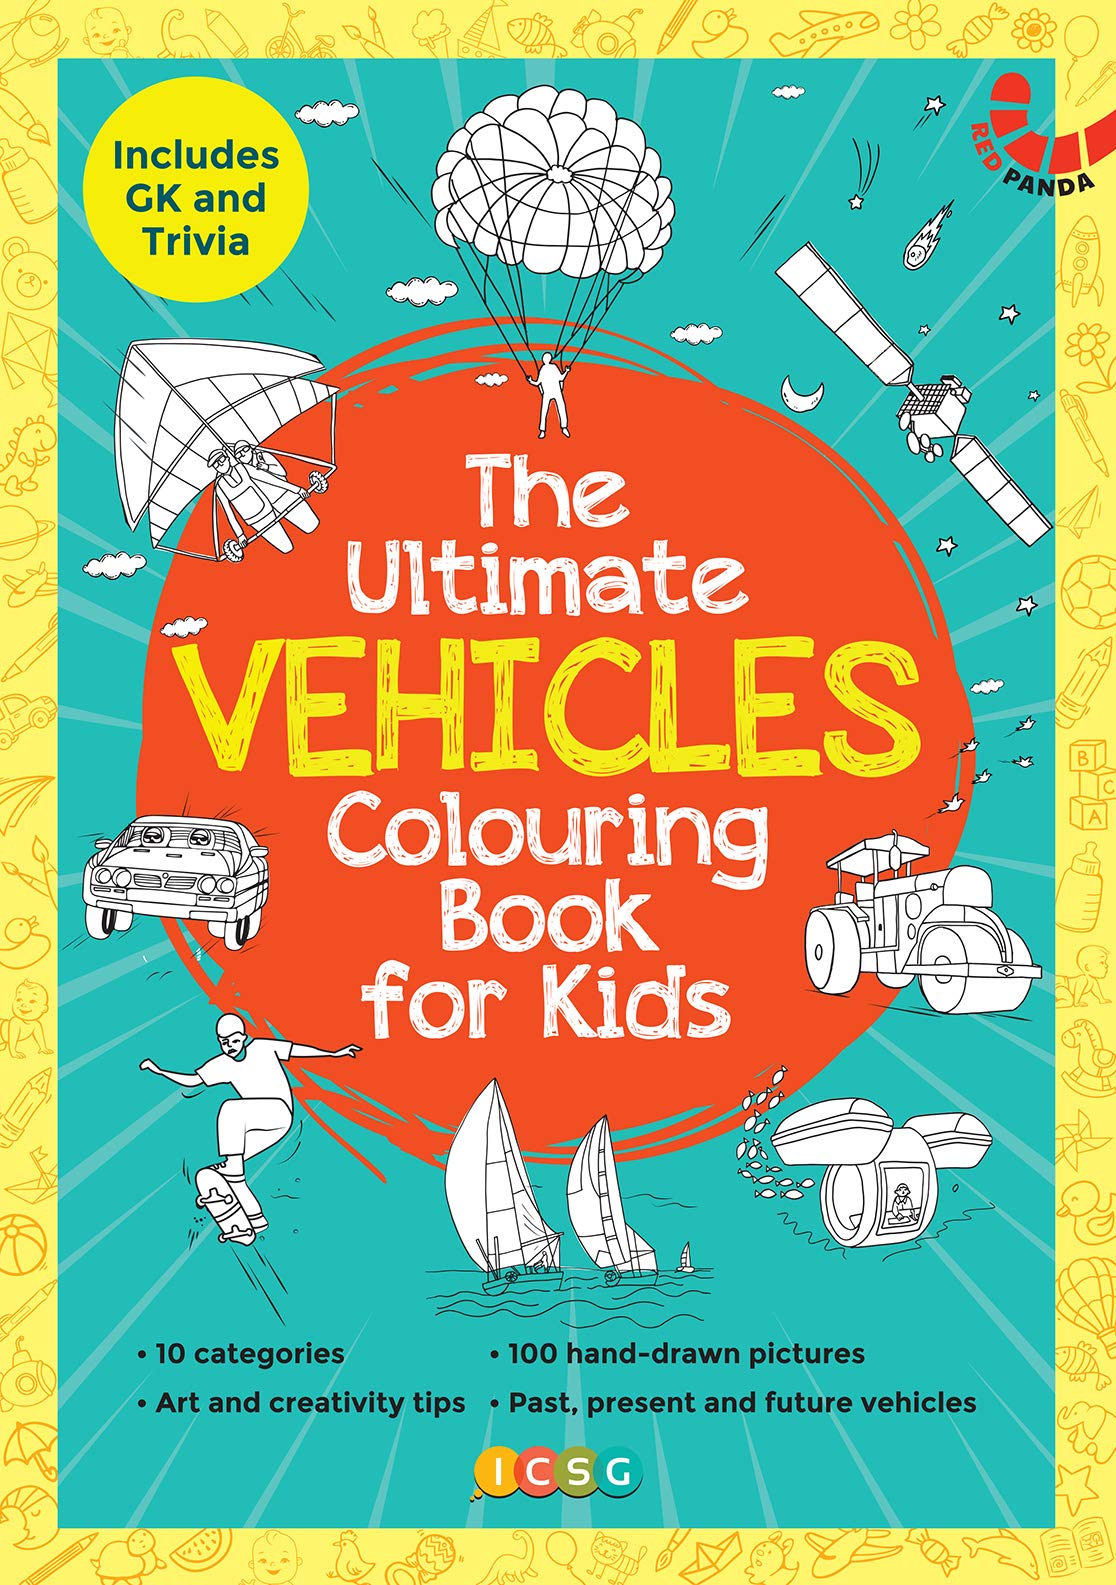 THE ULTIMATE VEHICLE COLOURING BOOK